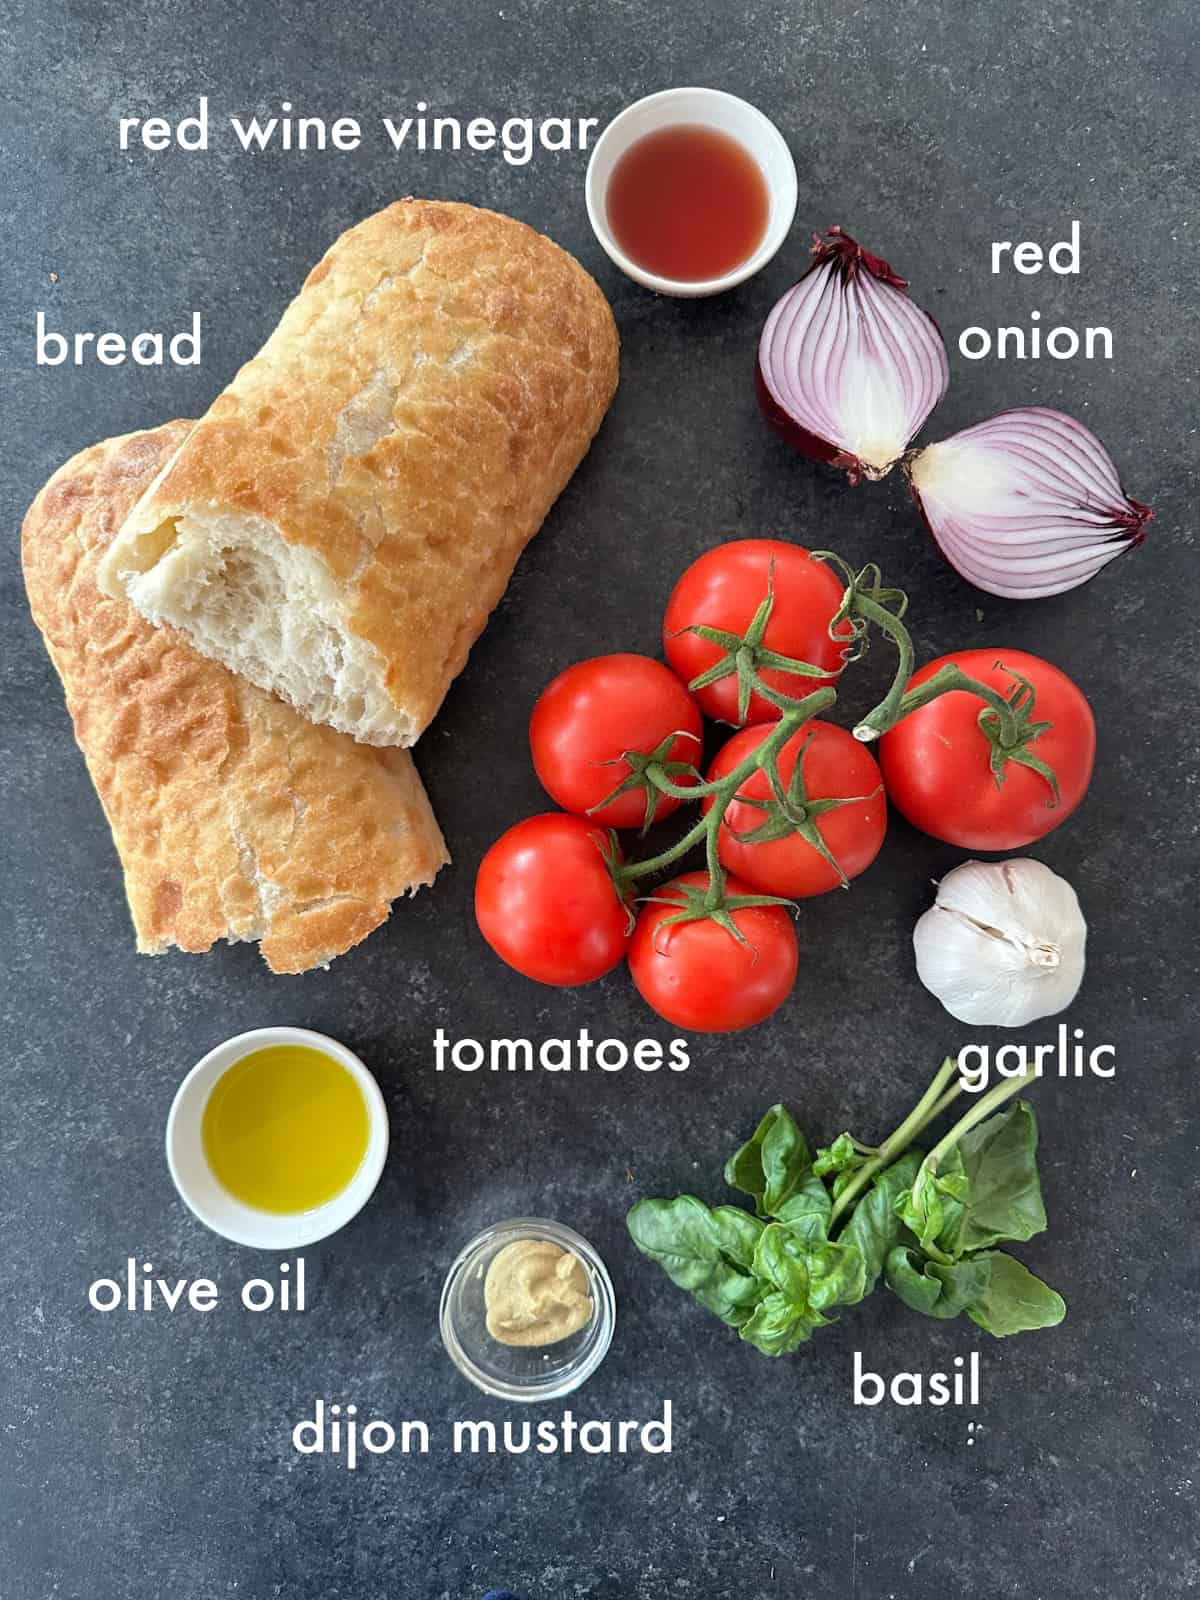 To make this recipe you need bread, tomatoes, onion, garlic, olive oil, vinegar and mustard. 